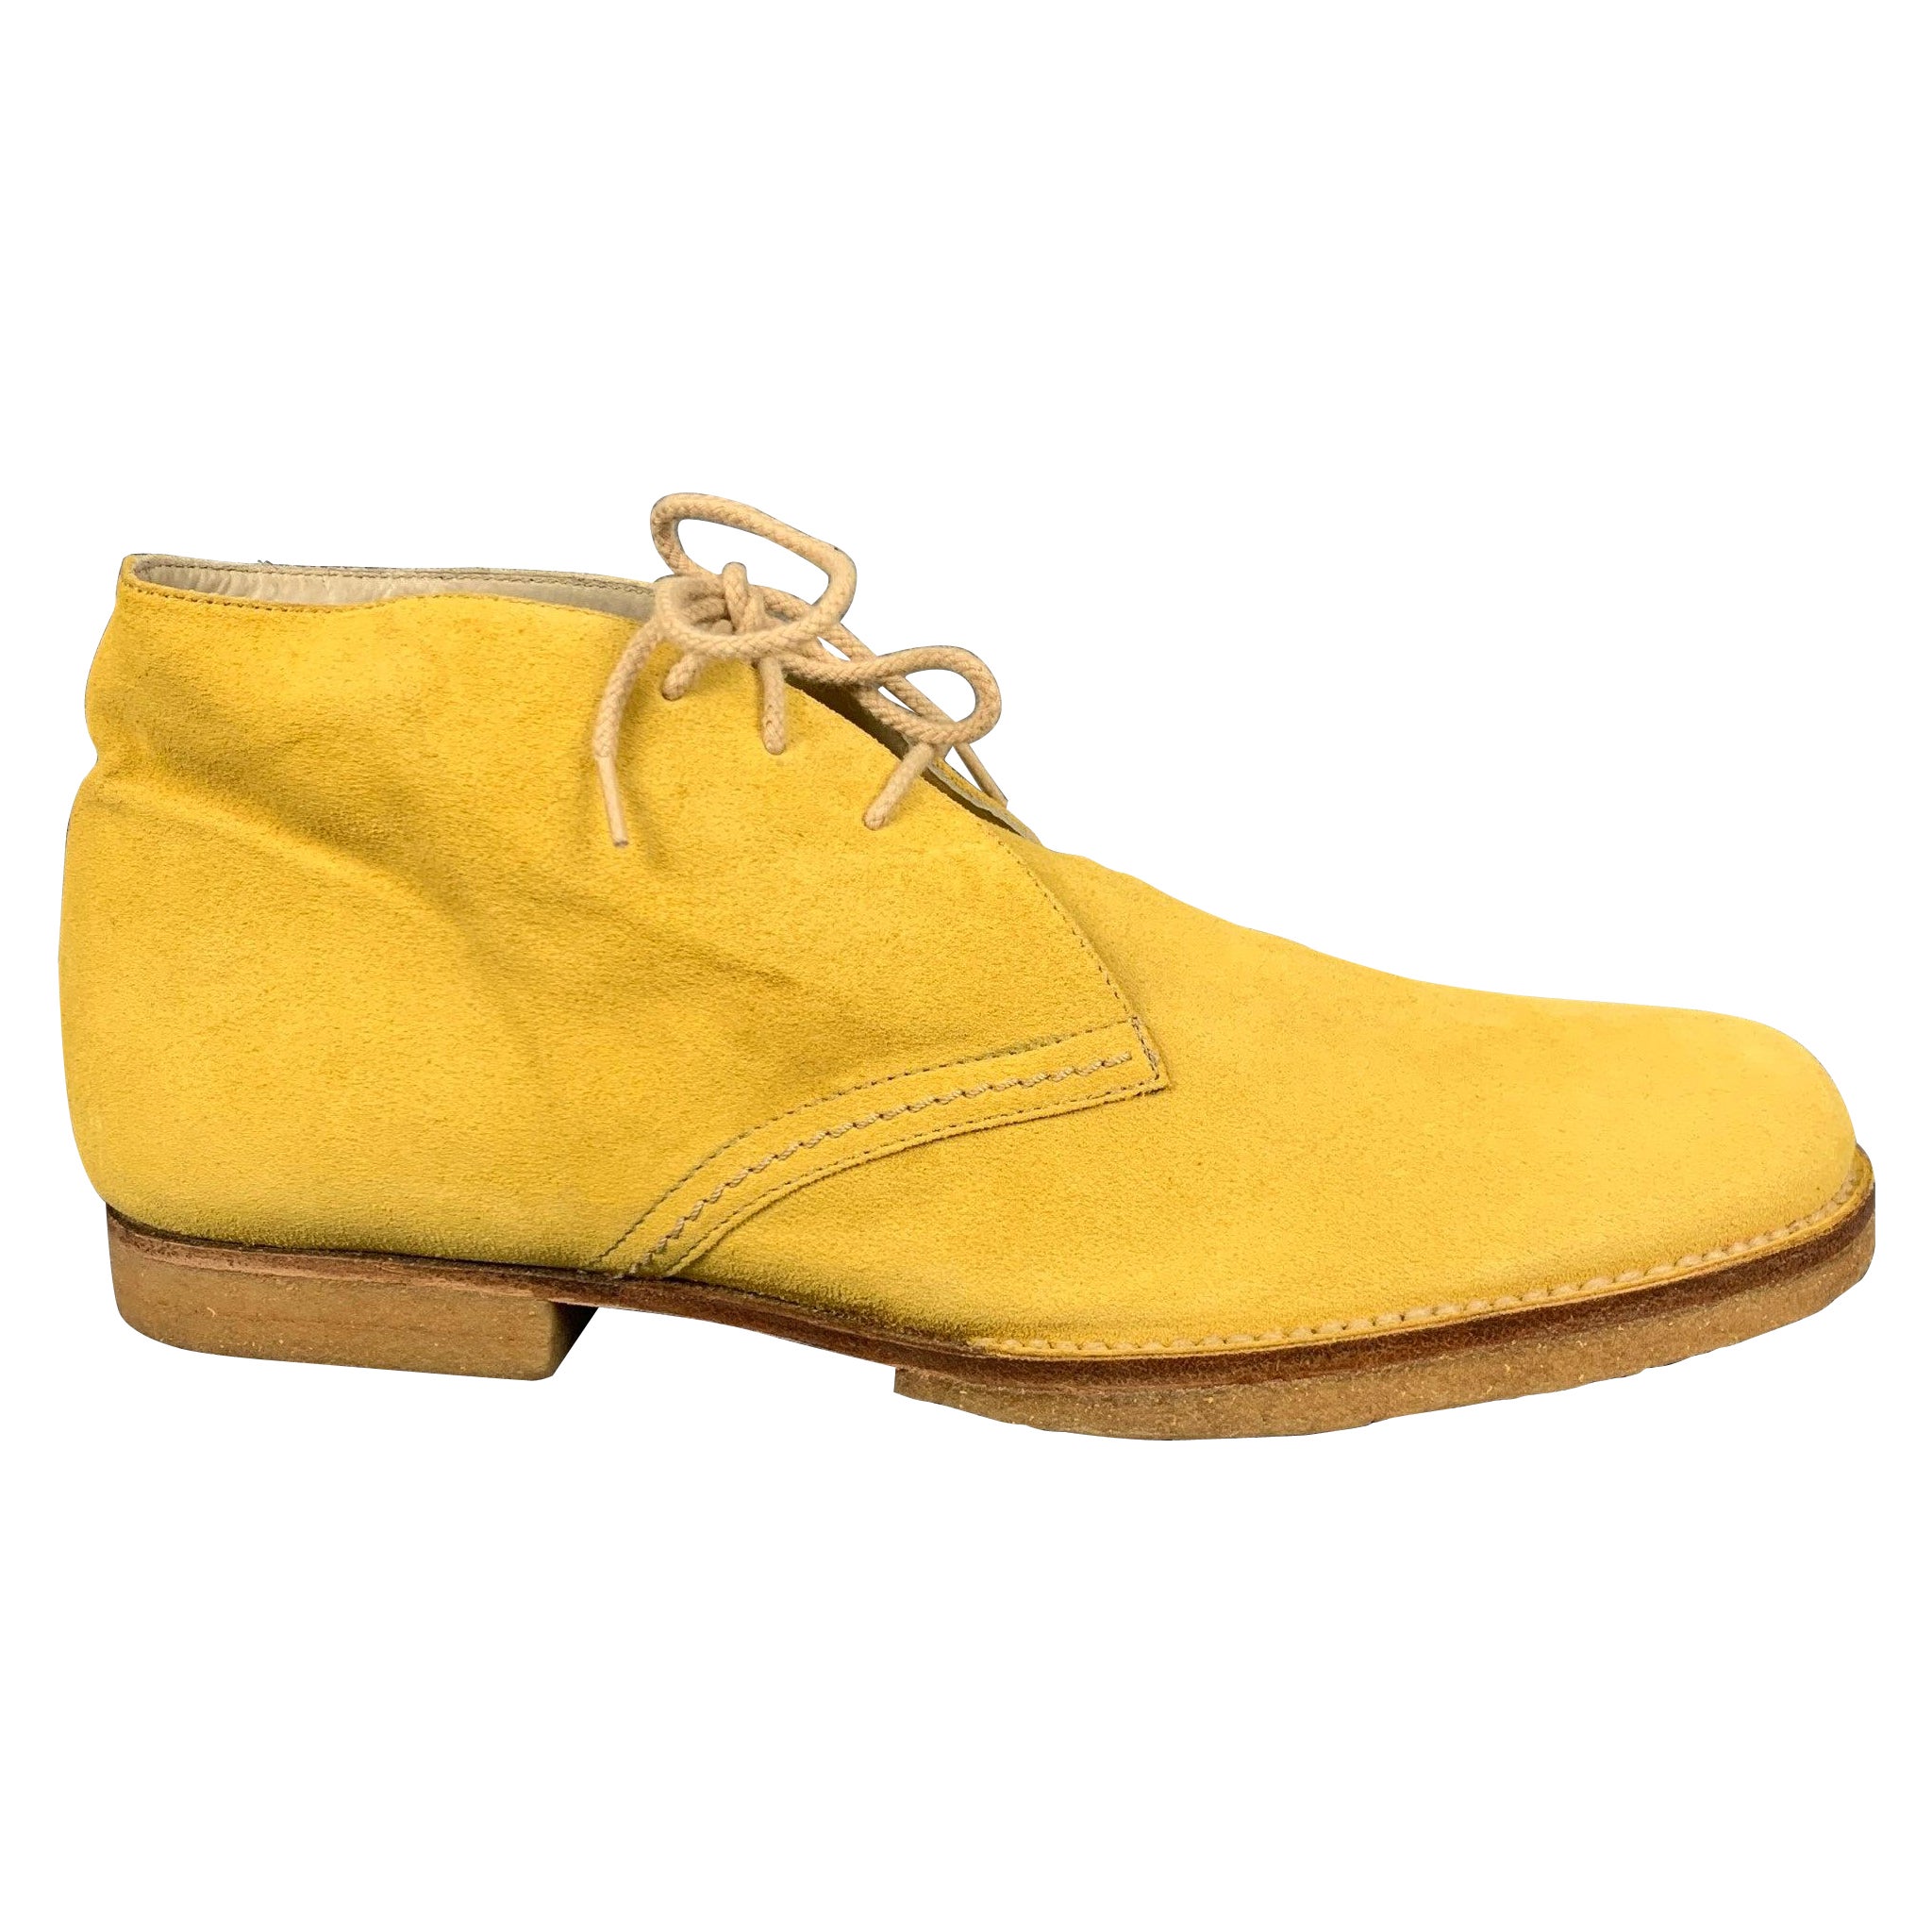 JIL SANDER Size 9 Yellow Suede Ankle Lace Up Shoes For Sale